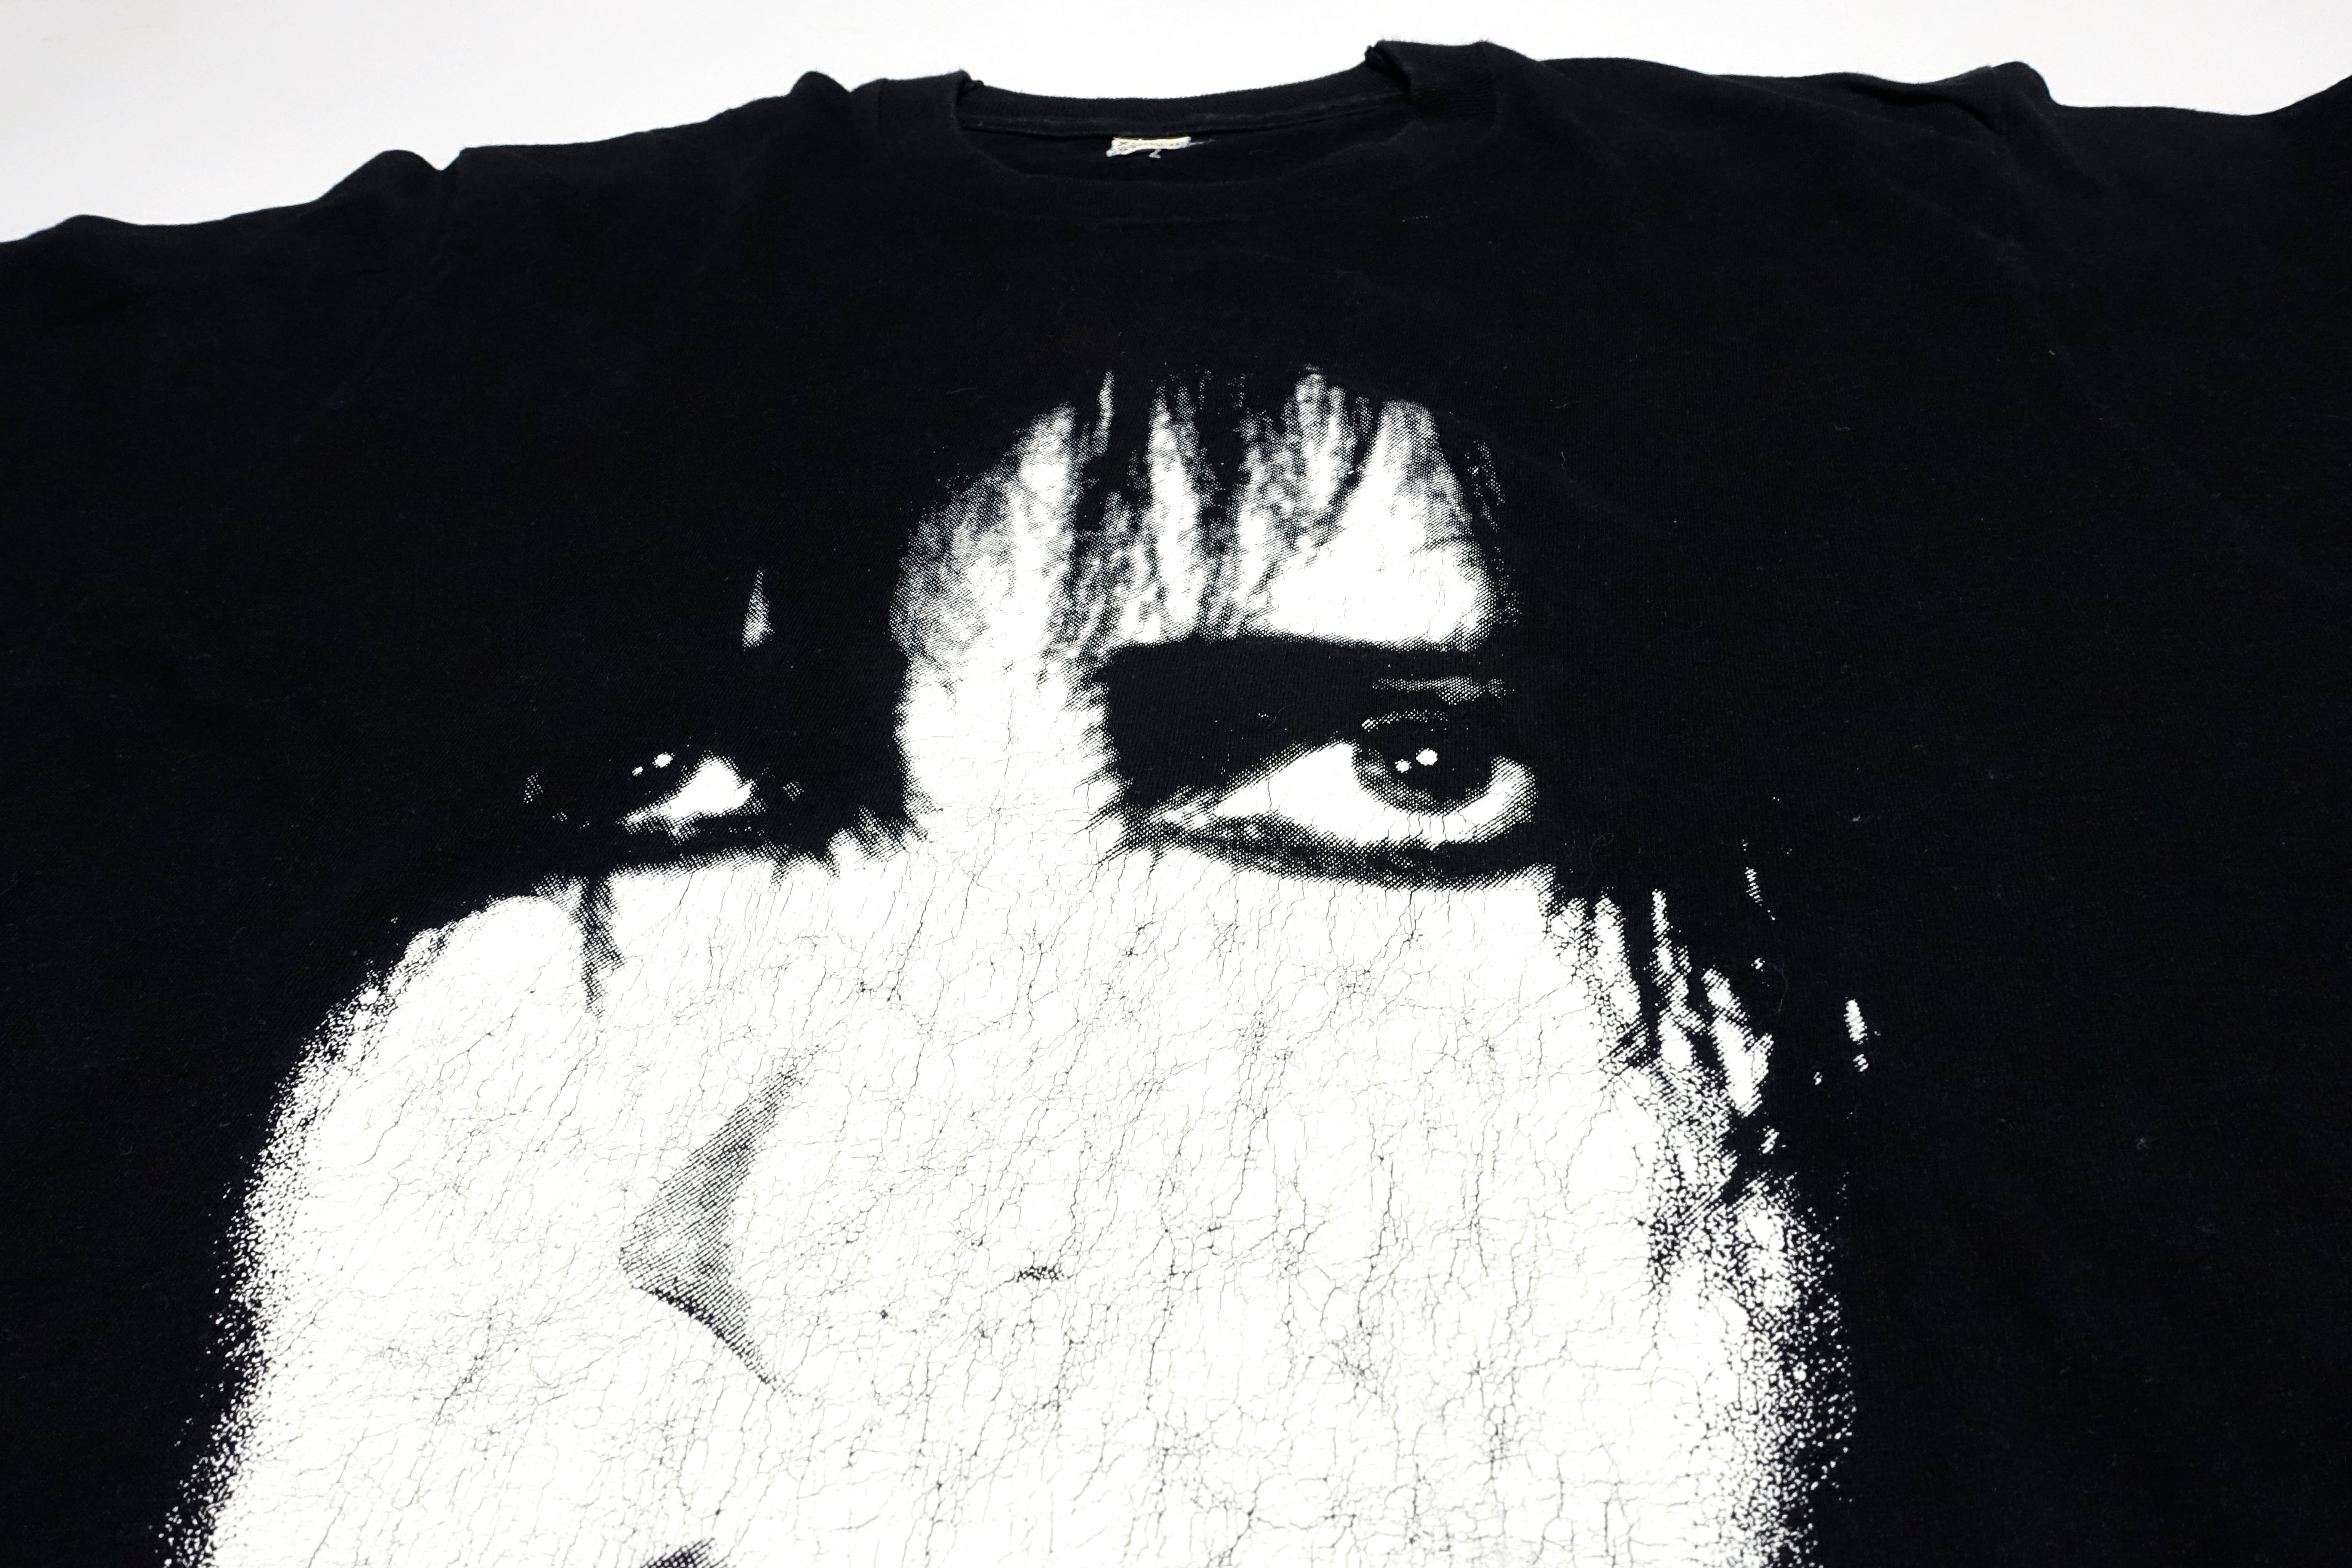 Siouxsie & The Banshees - Siouxsie Face Tour Shirt Size Large